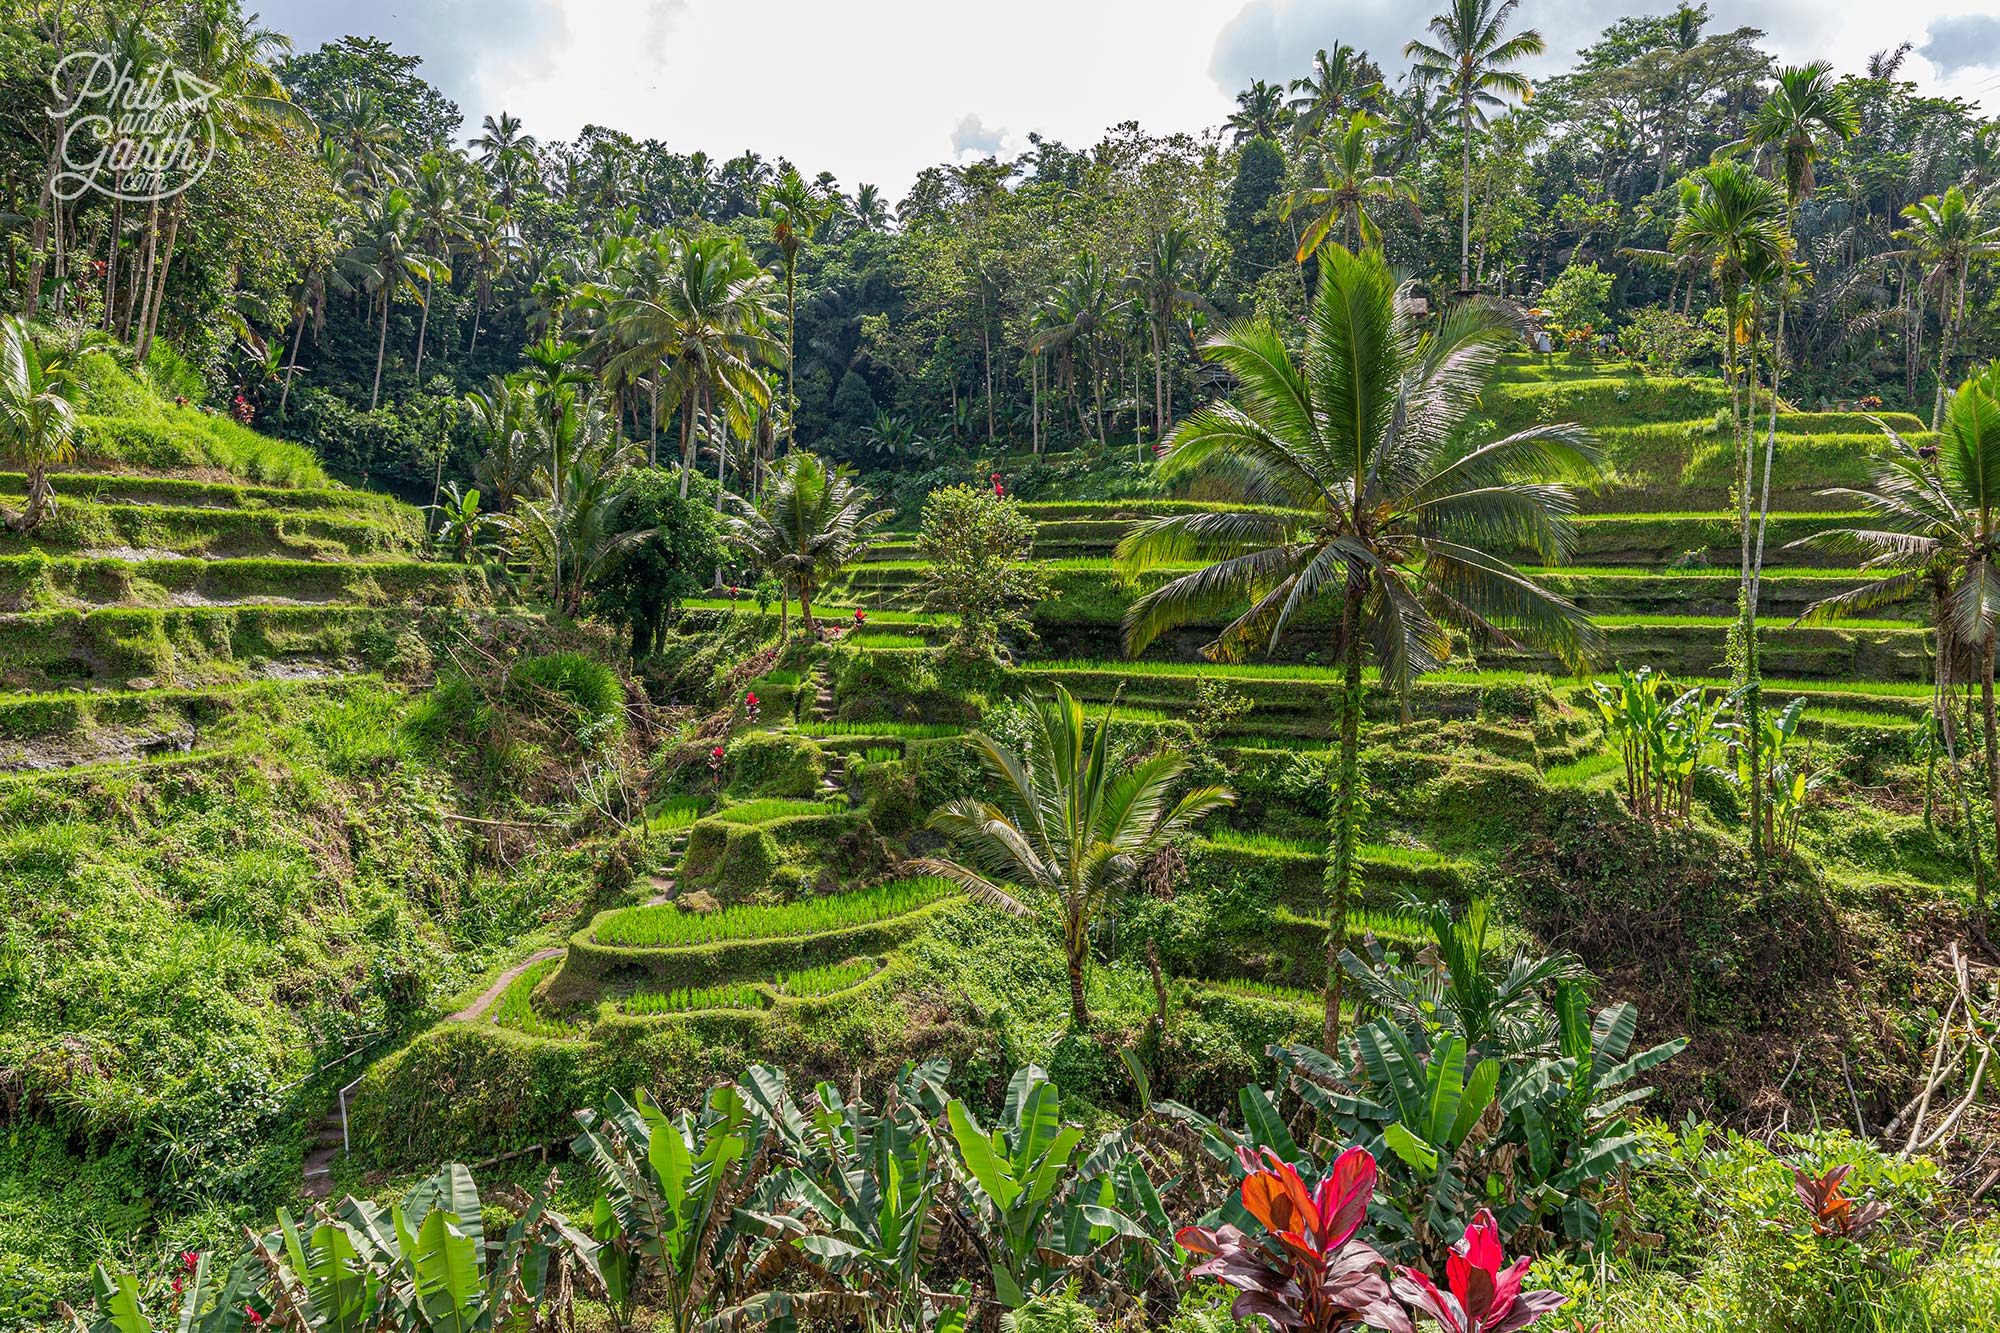 Rice fields or ‘paddy fields’ are a major part of Balinese culture